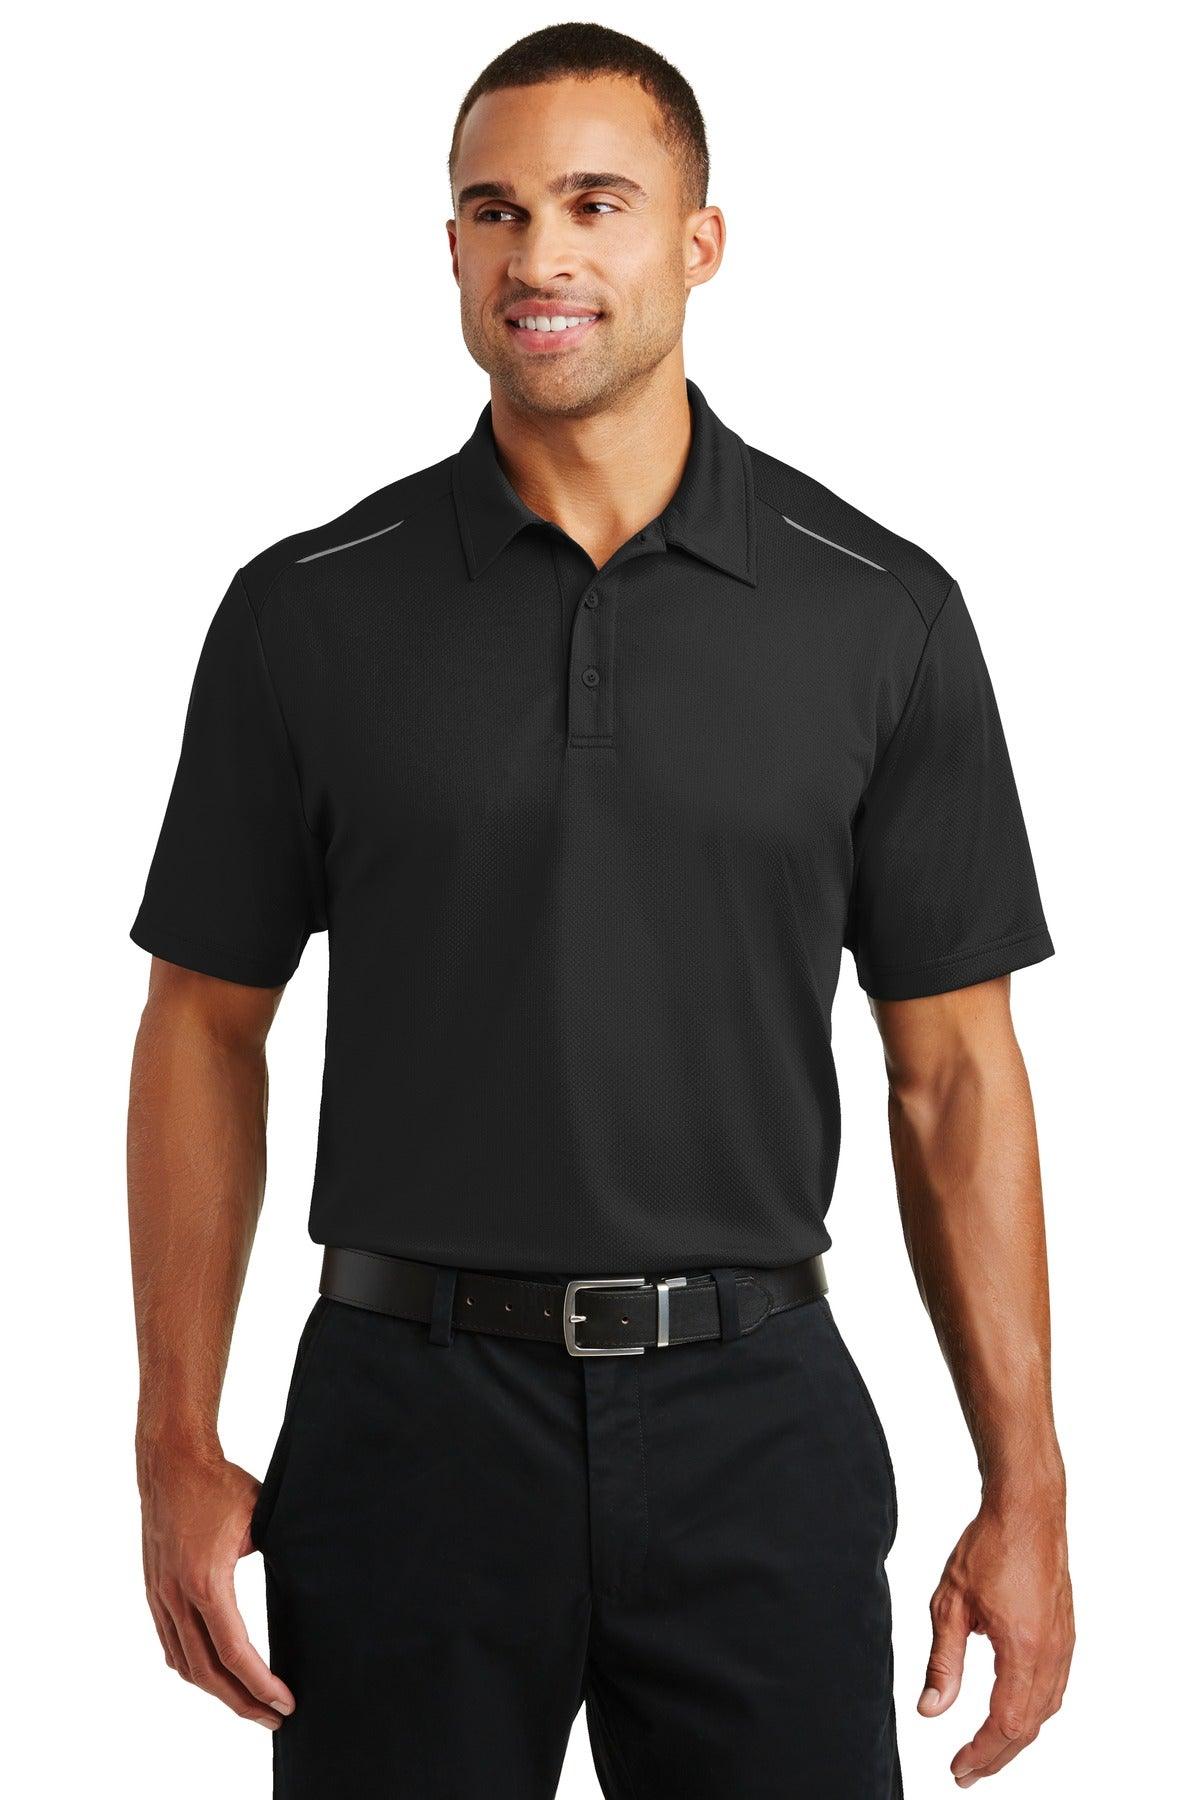 Port Authority Pinpoint Mesh Polo. K580 - Dresses Max